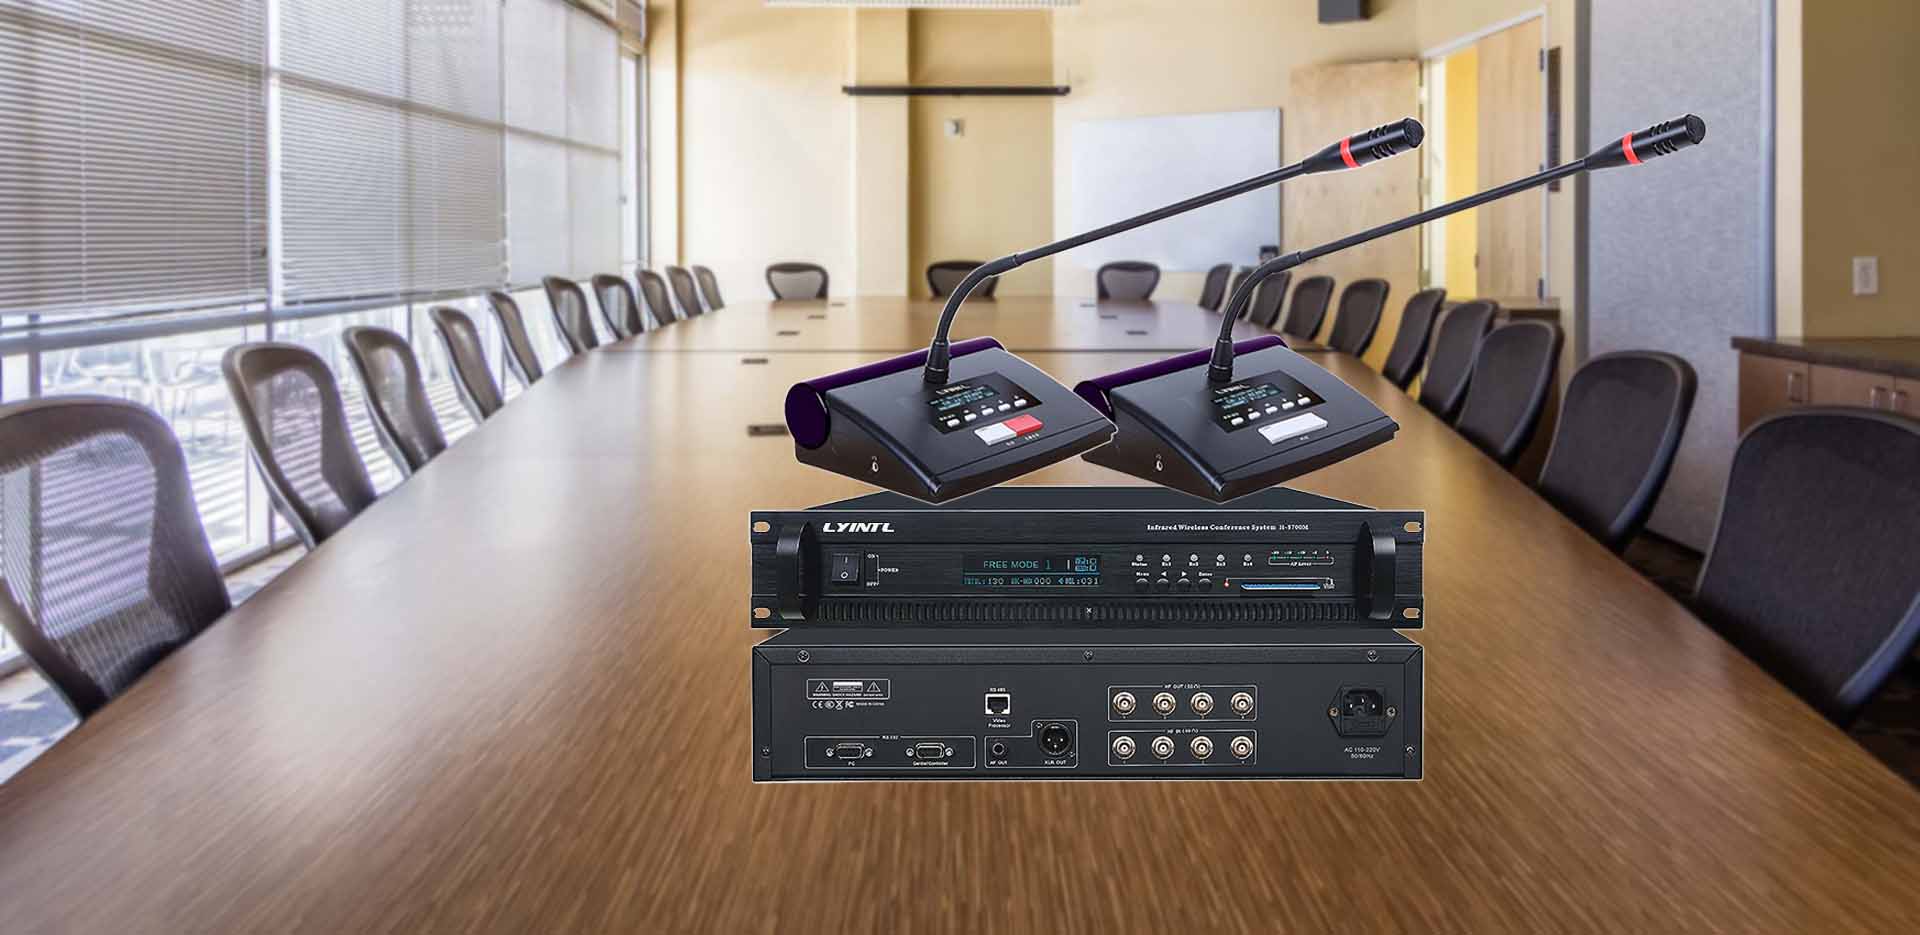 Full Digital IR Wireless Conference System H-8700